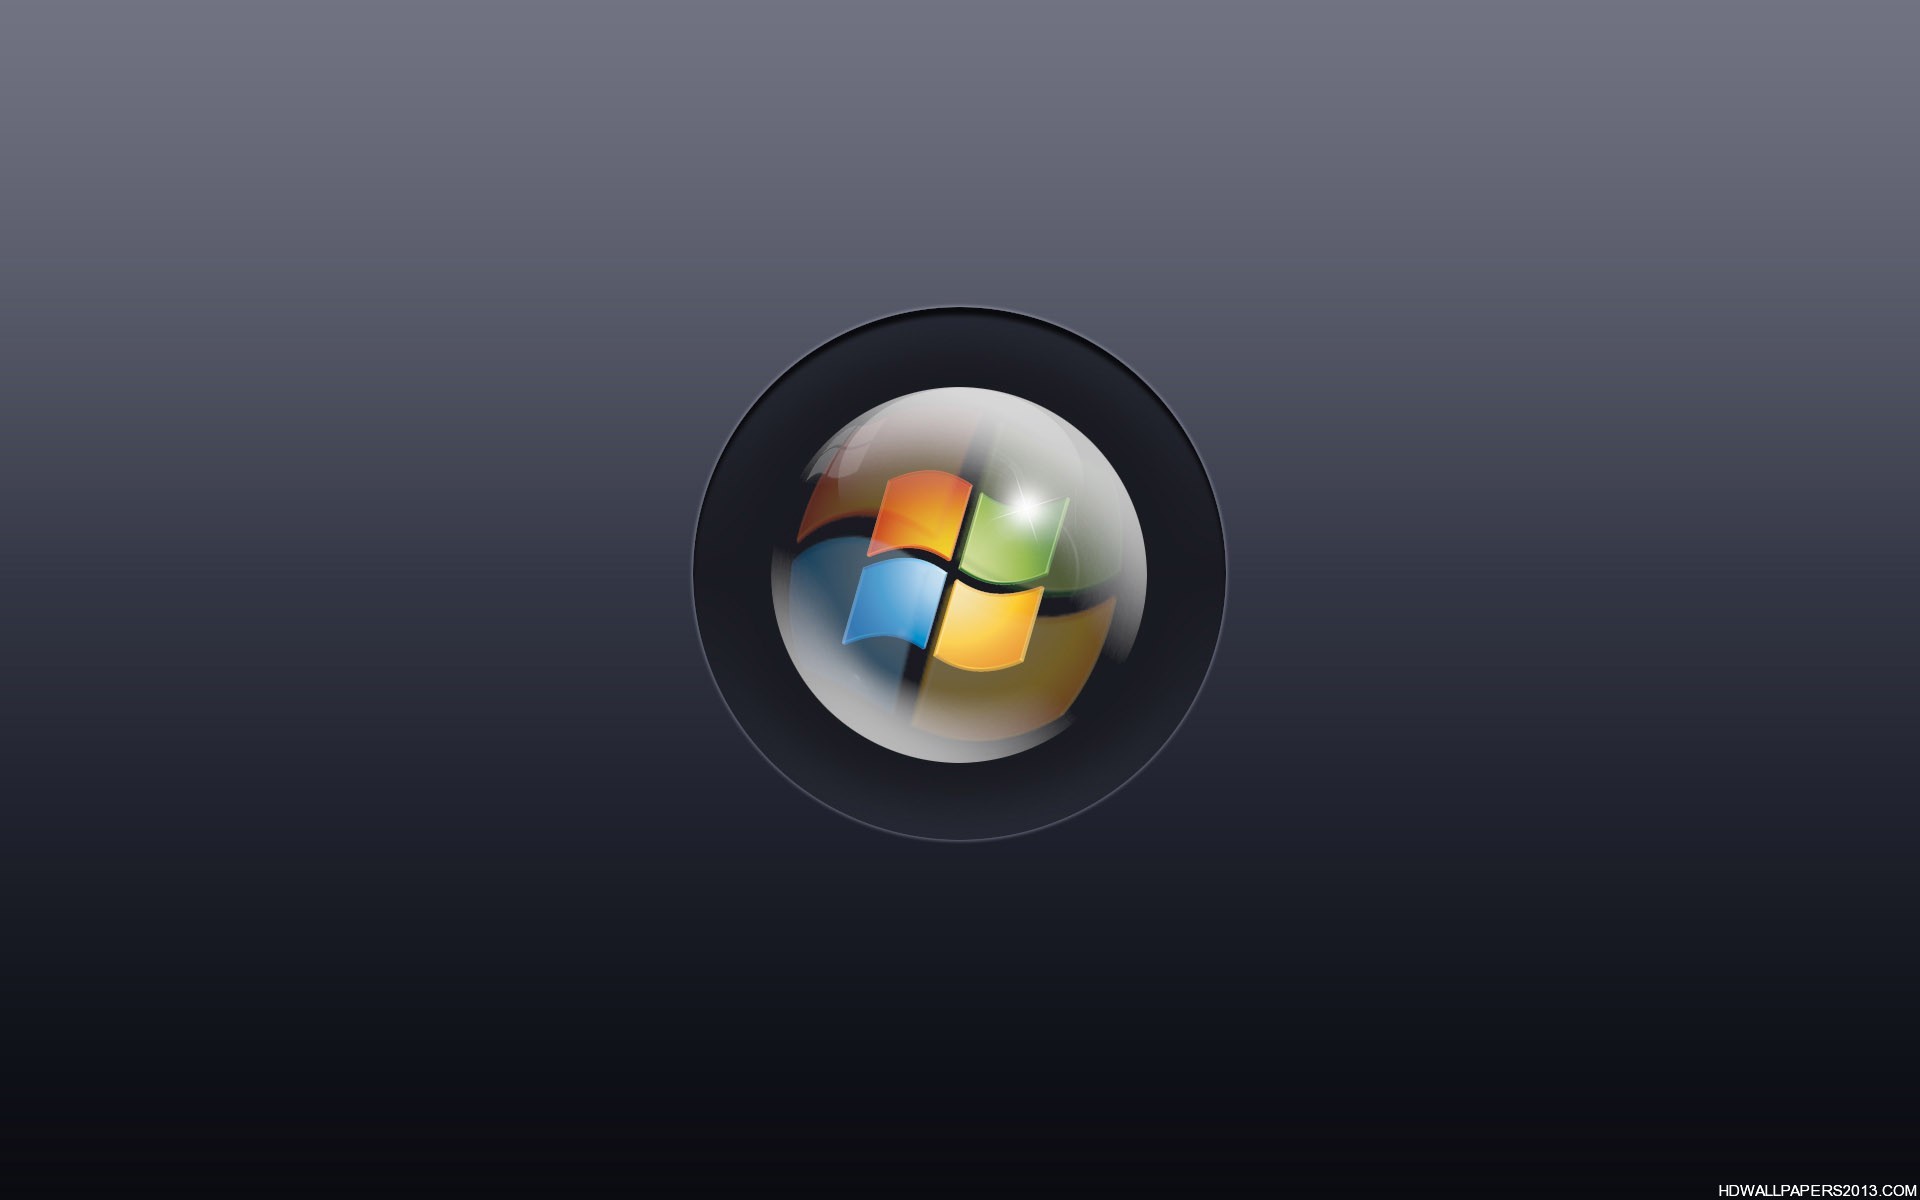 Windows Logo Wallpapers | High Definition Wallpapers, High ...